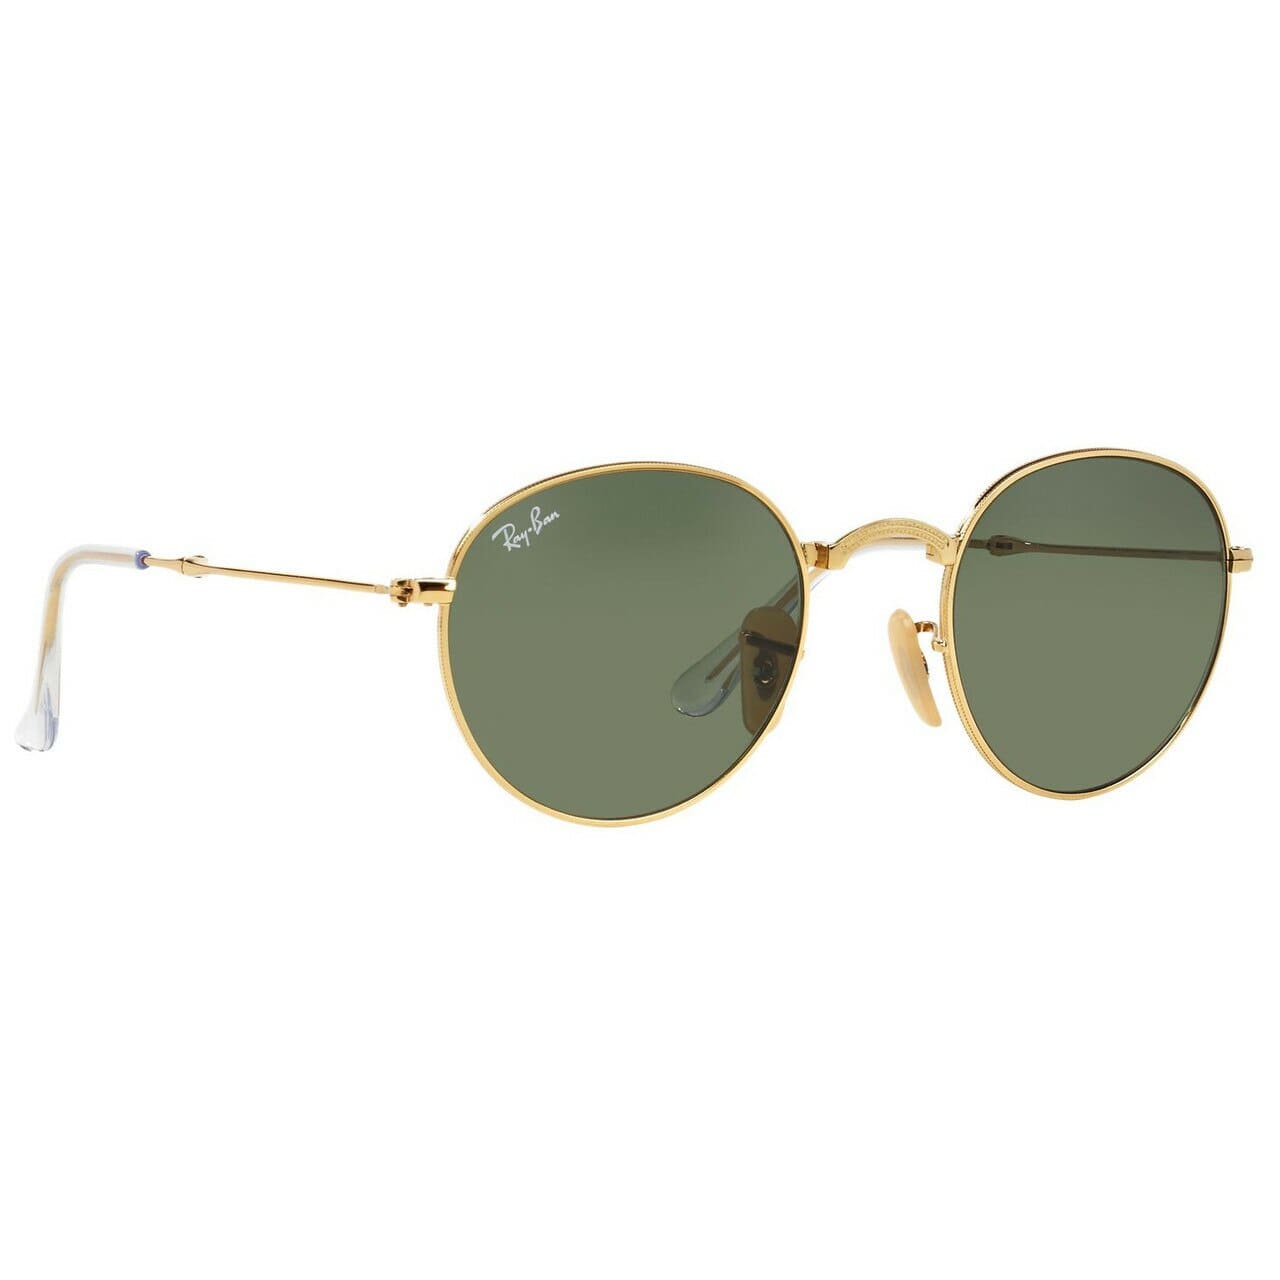 Ray-Ban RB3532-001 Icons Round Sunglasses With Green Classic G-15 Lens Metal Folding Frame 8053672497816